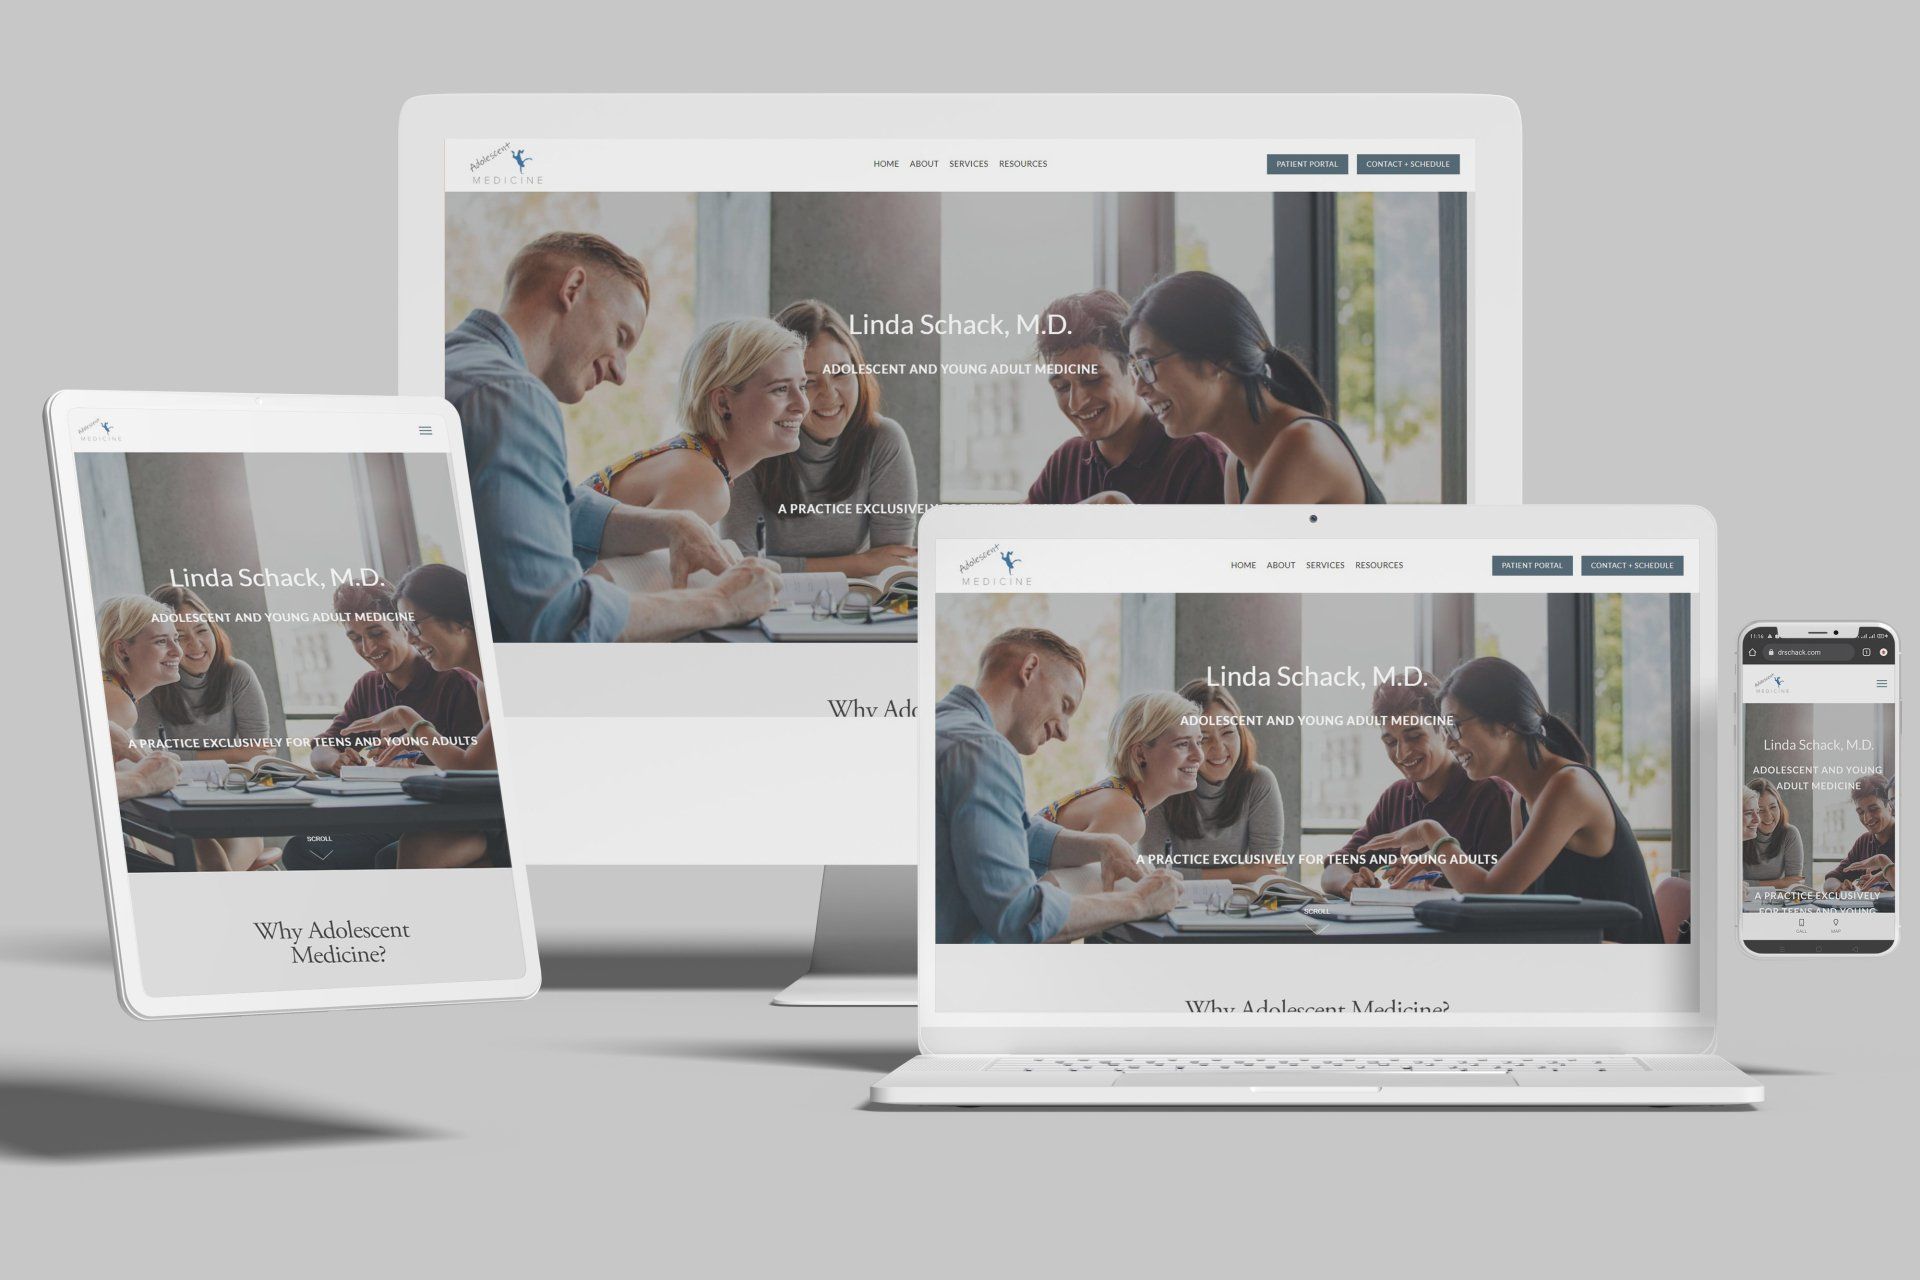 Squarespace for Doctors Who Specialize in Adolescent Medicine